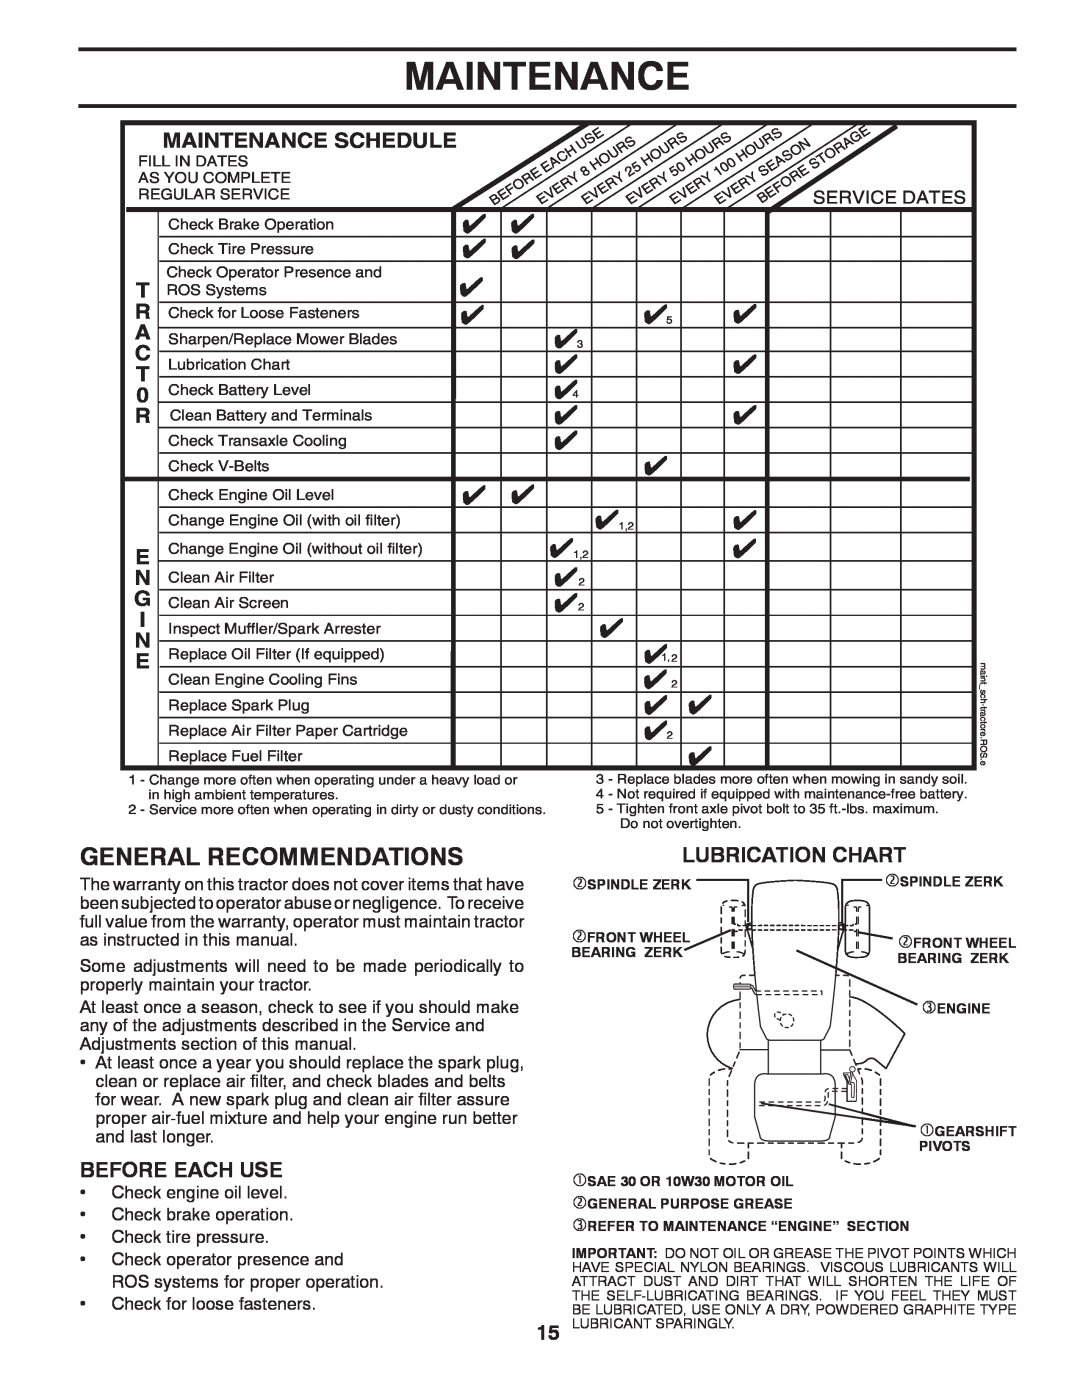 Poulan 418745 manual General Recommendations, Maintenance Schedule, Before Each Use, Lubrication Chart, Service Dates 